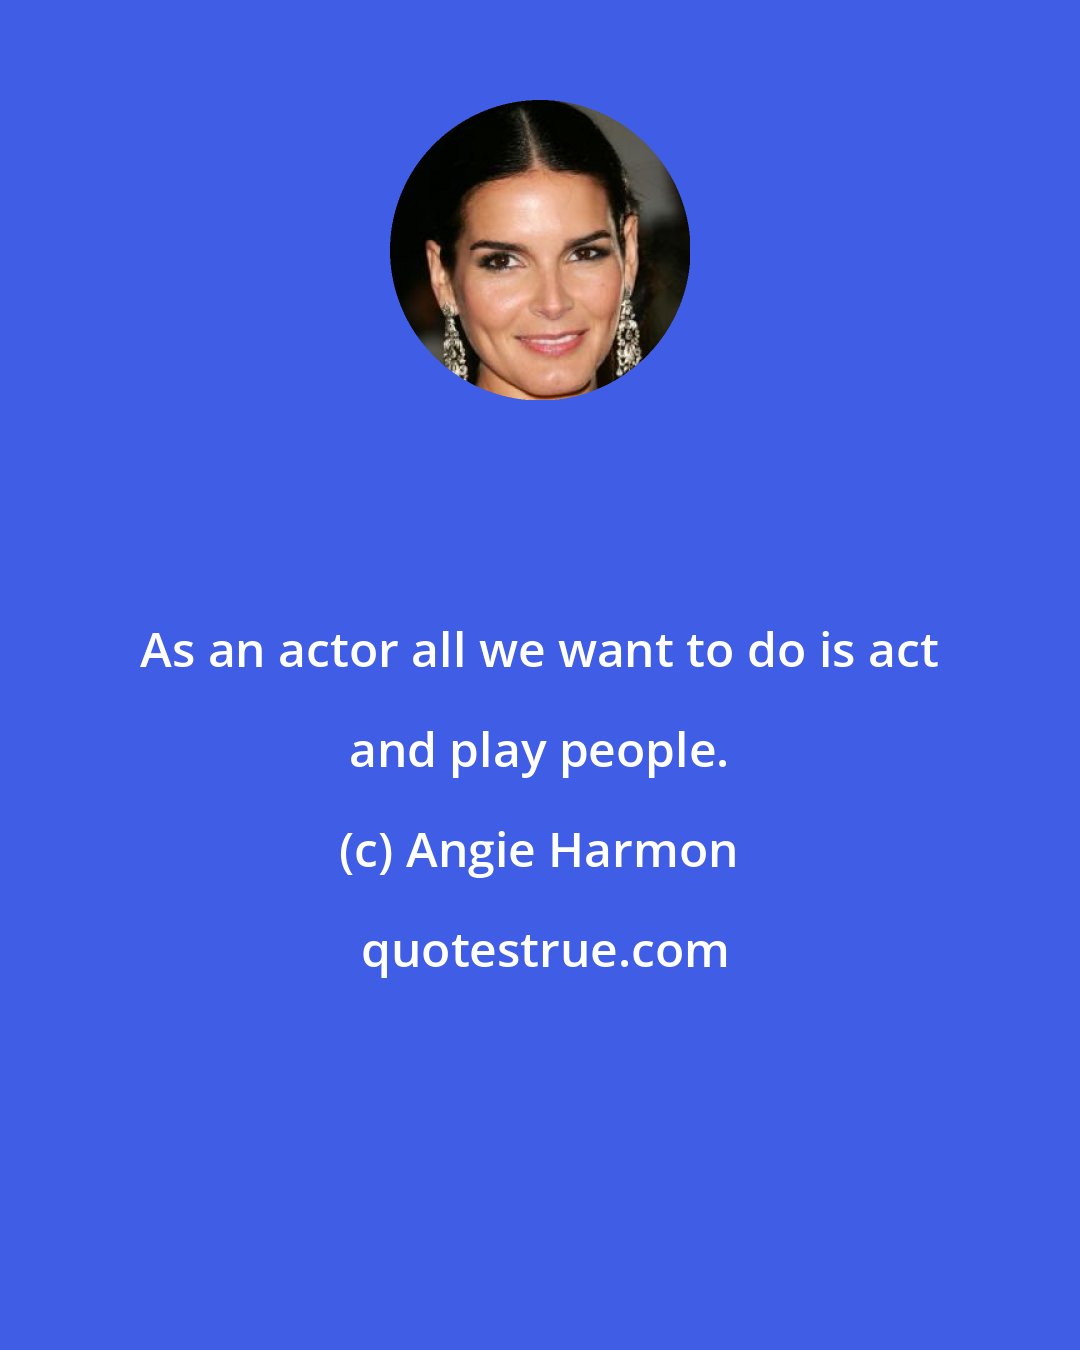 Angie Harmon: As an actor all we want to do is act and play people.